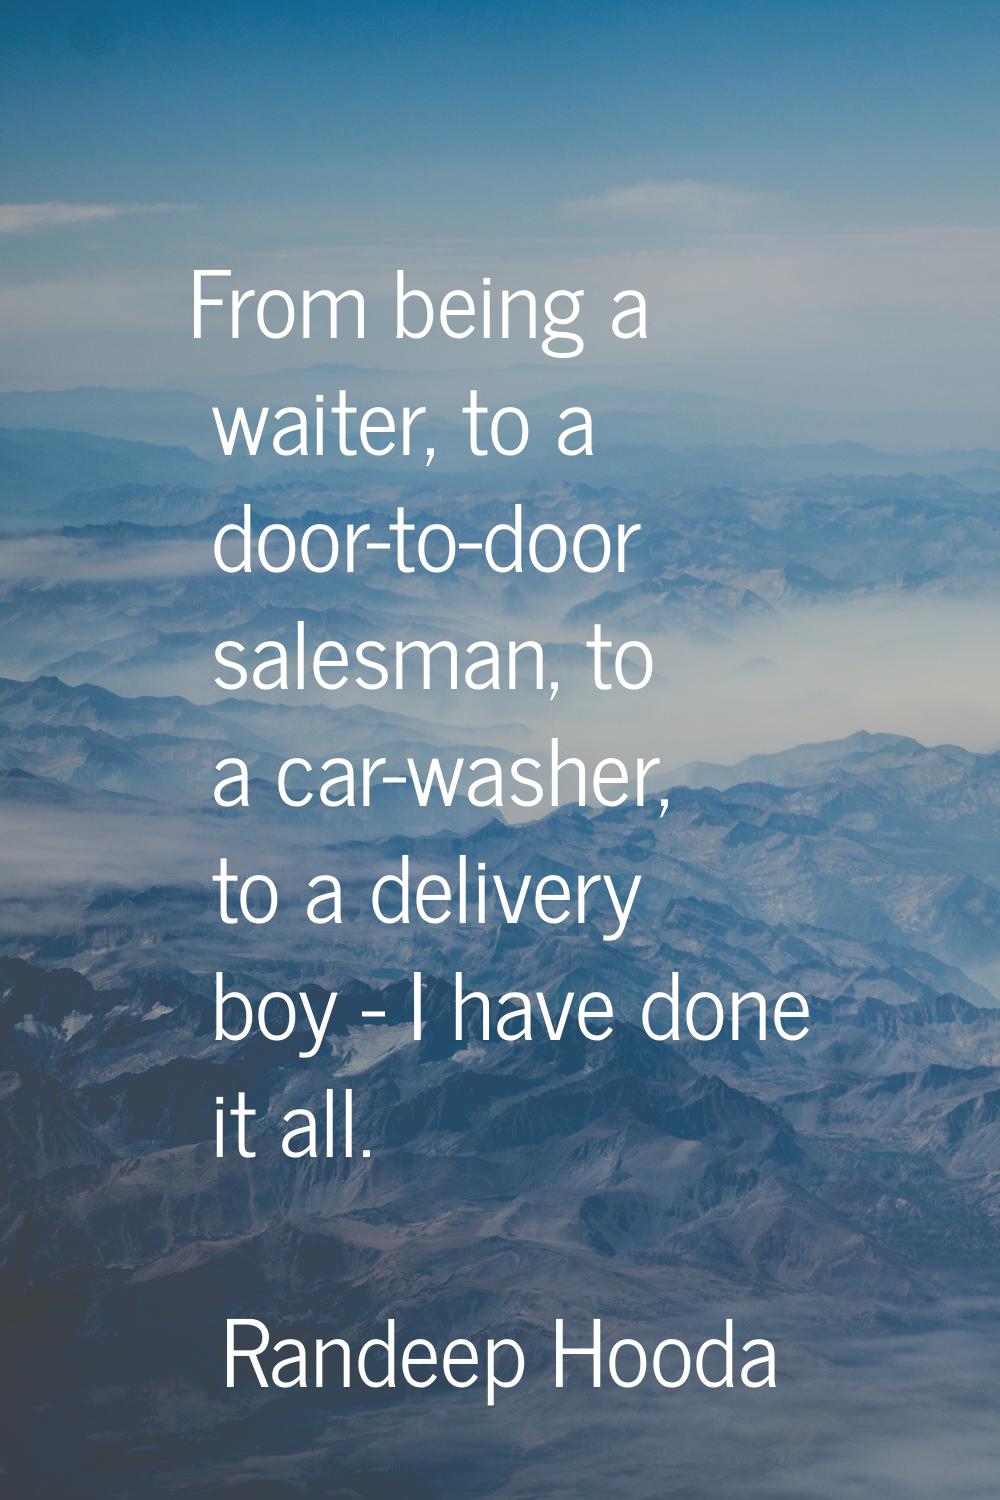 From being a waiter, to a door-to-door salesman, to a car-washer, to a delivery boy - I have done i